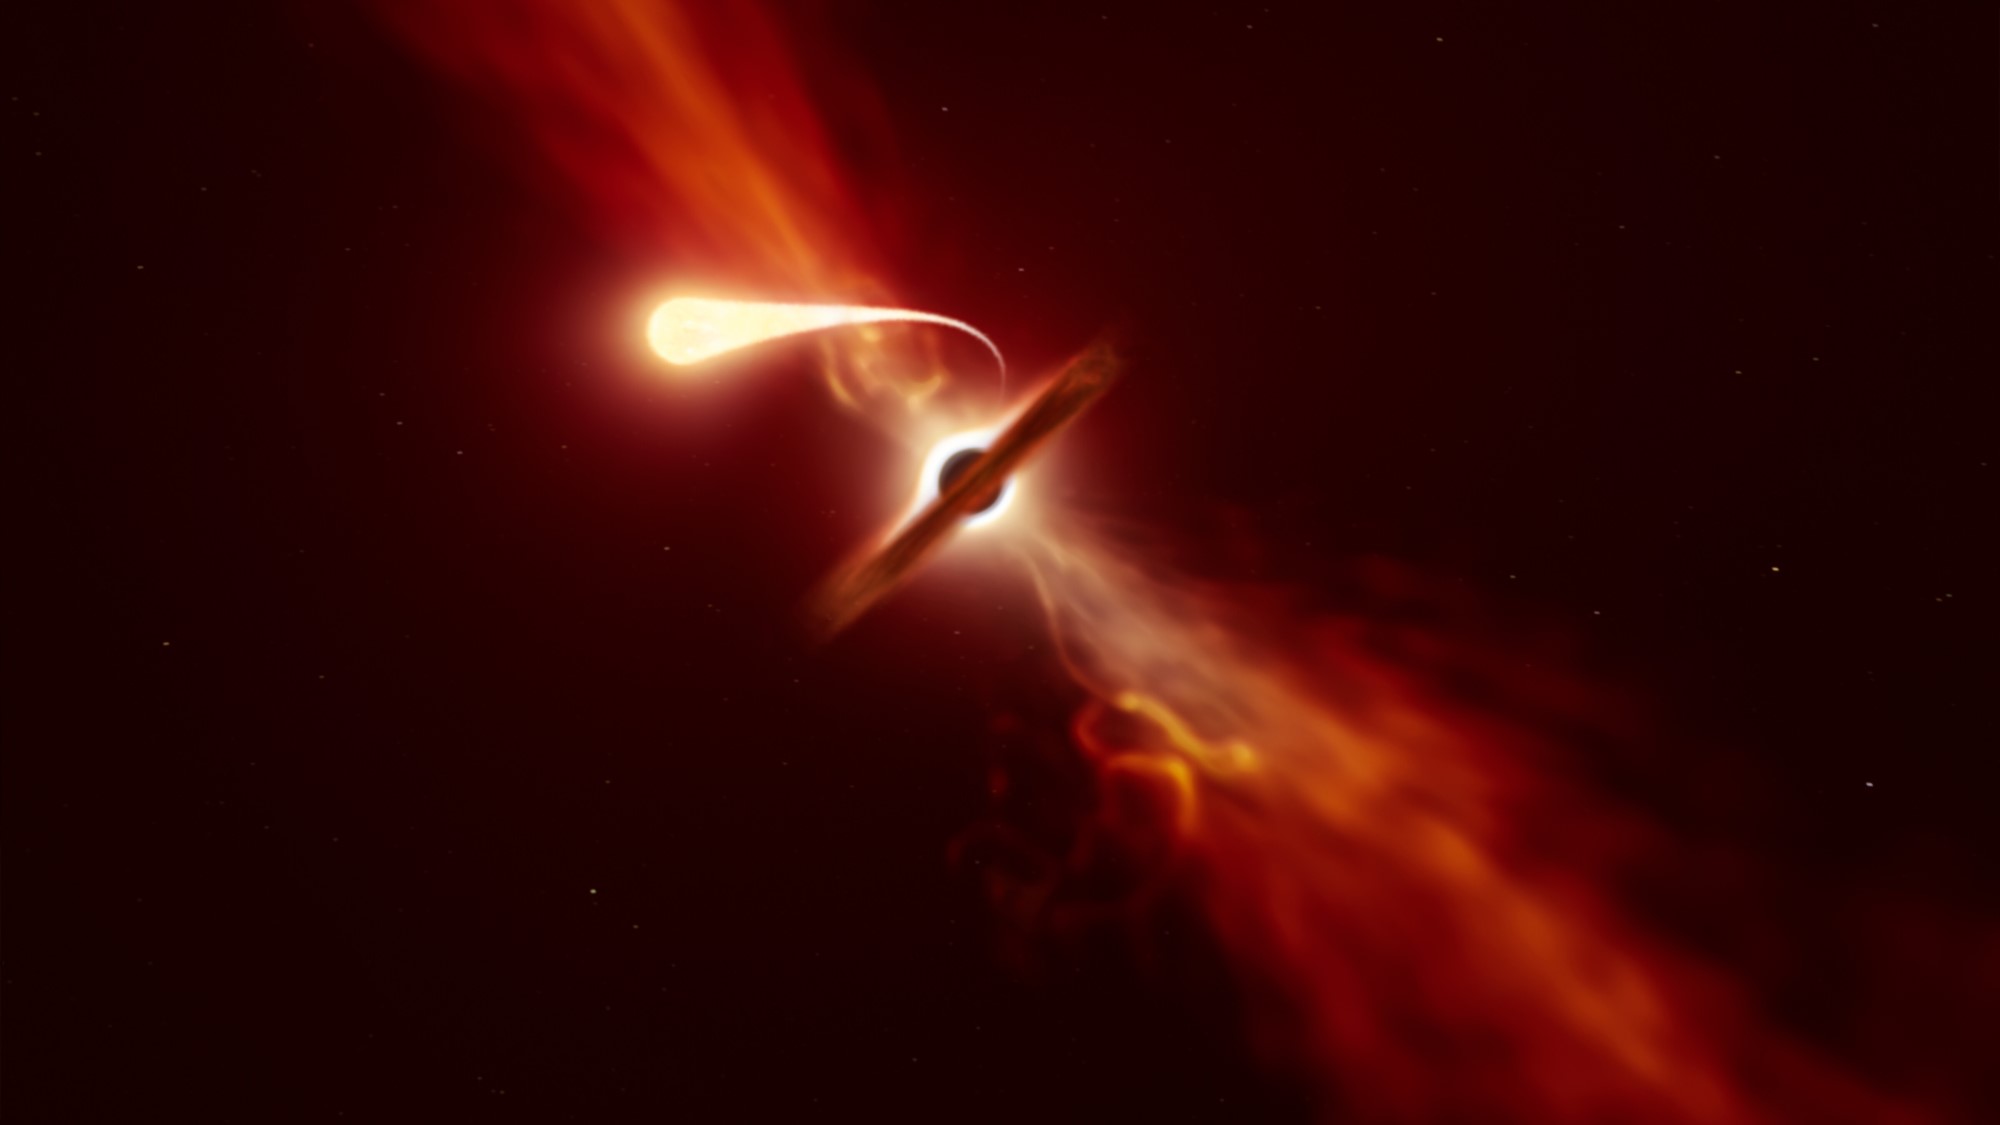 An artist's depiction of a supermassive black hole tearing a star apart.